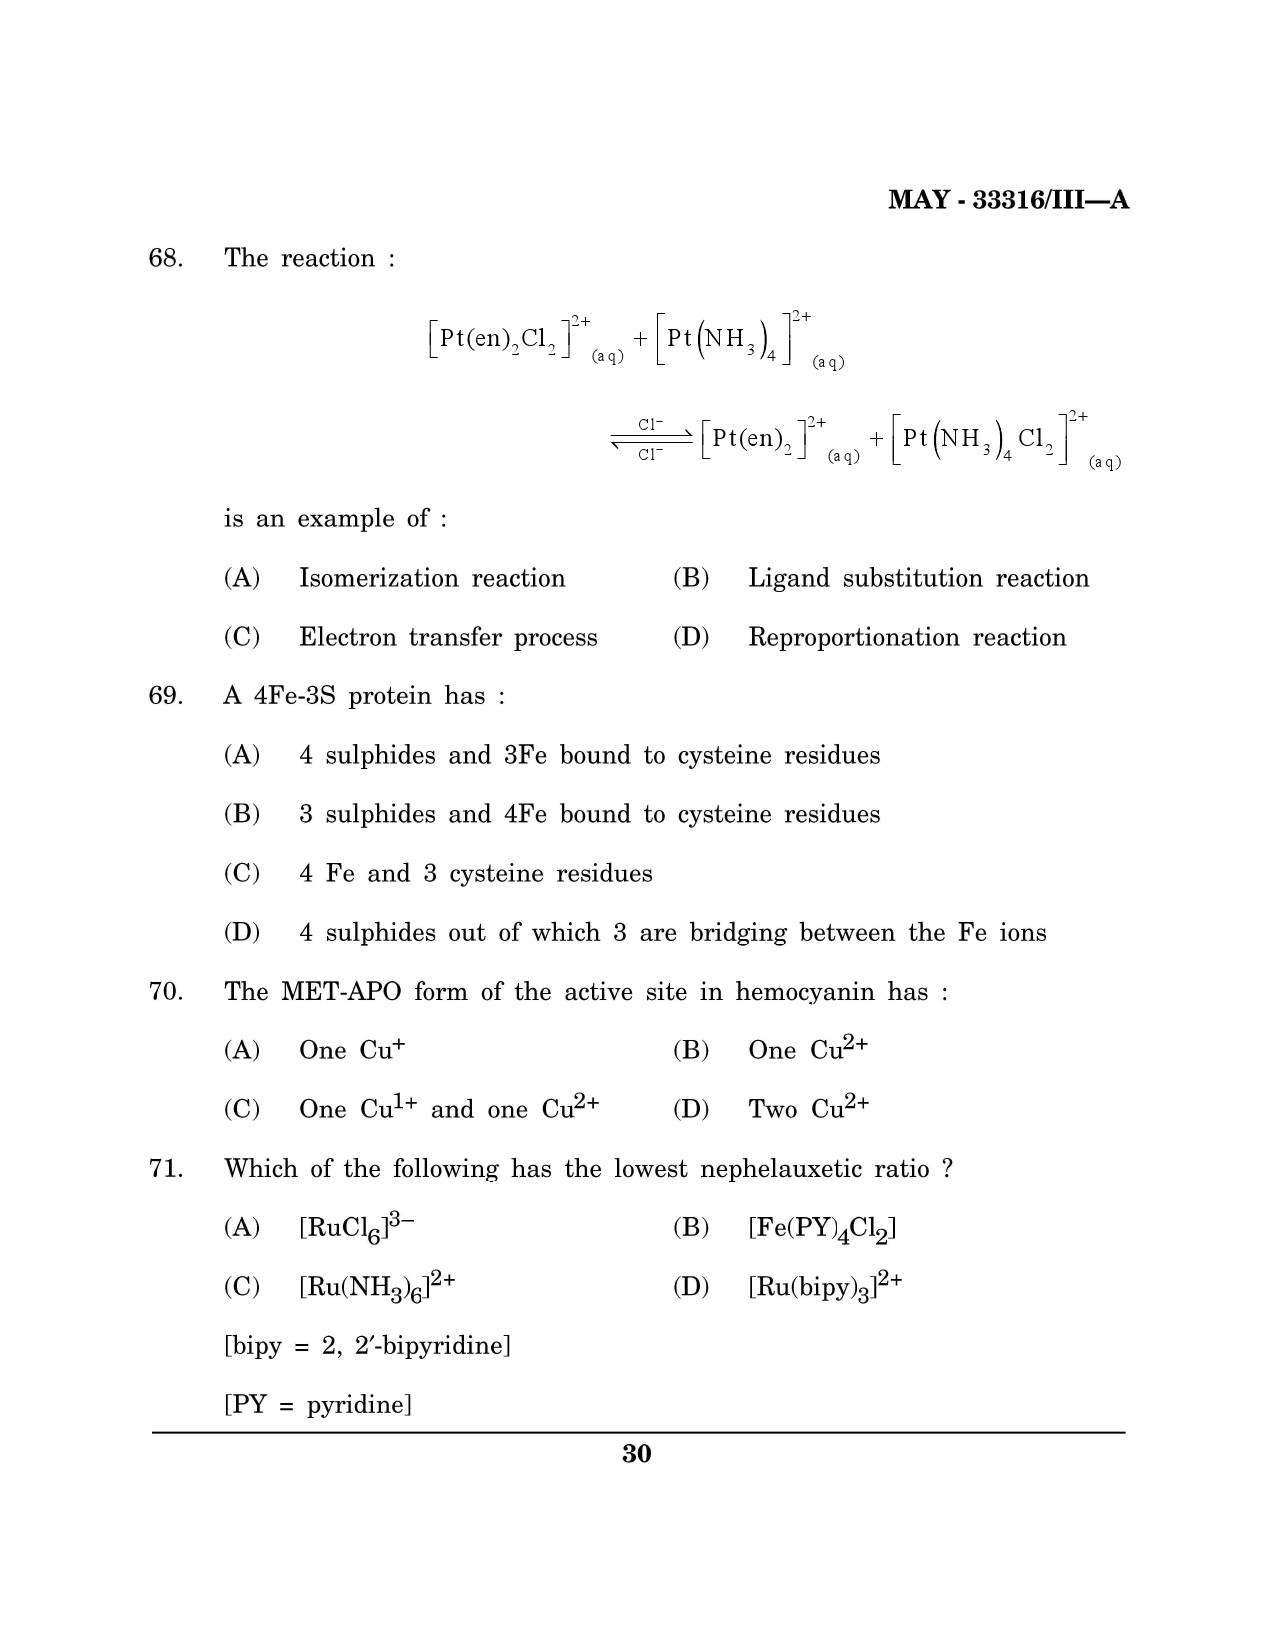 Maharashtra SET Chemical Sciences Question Paper III May 2016 29